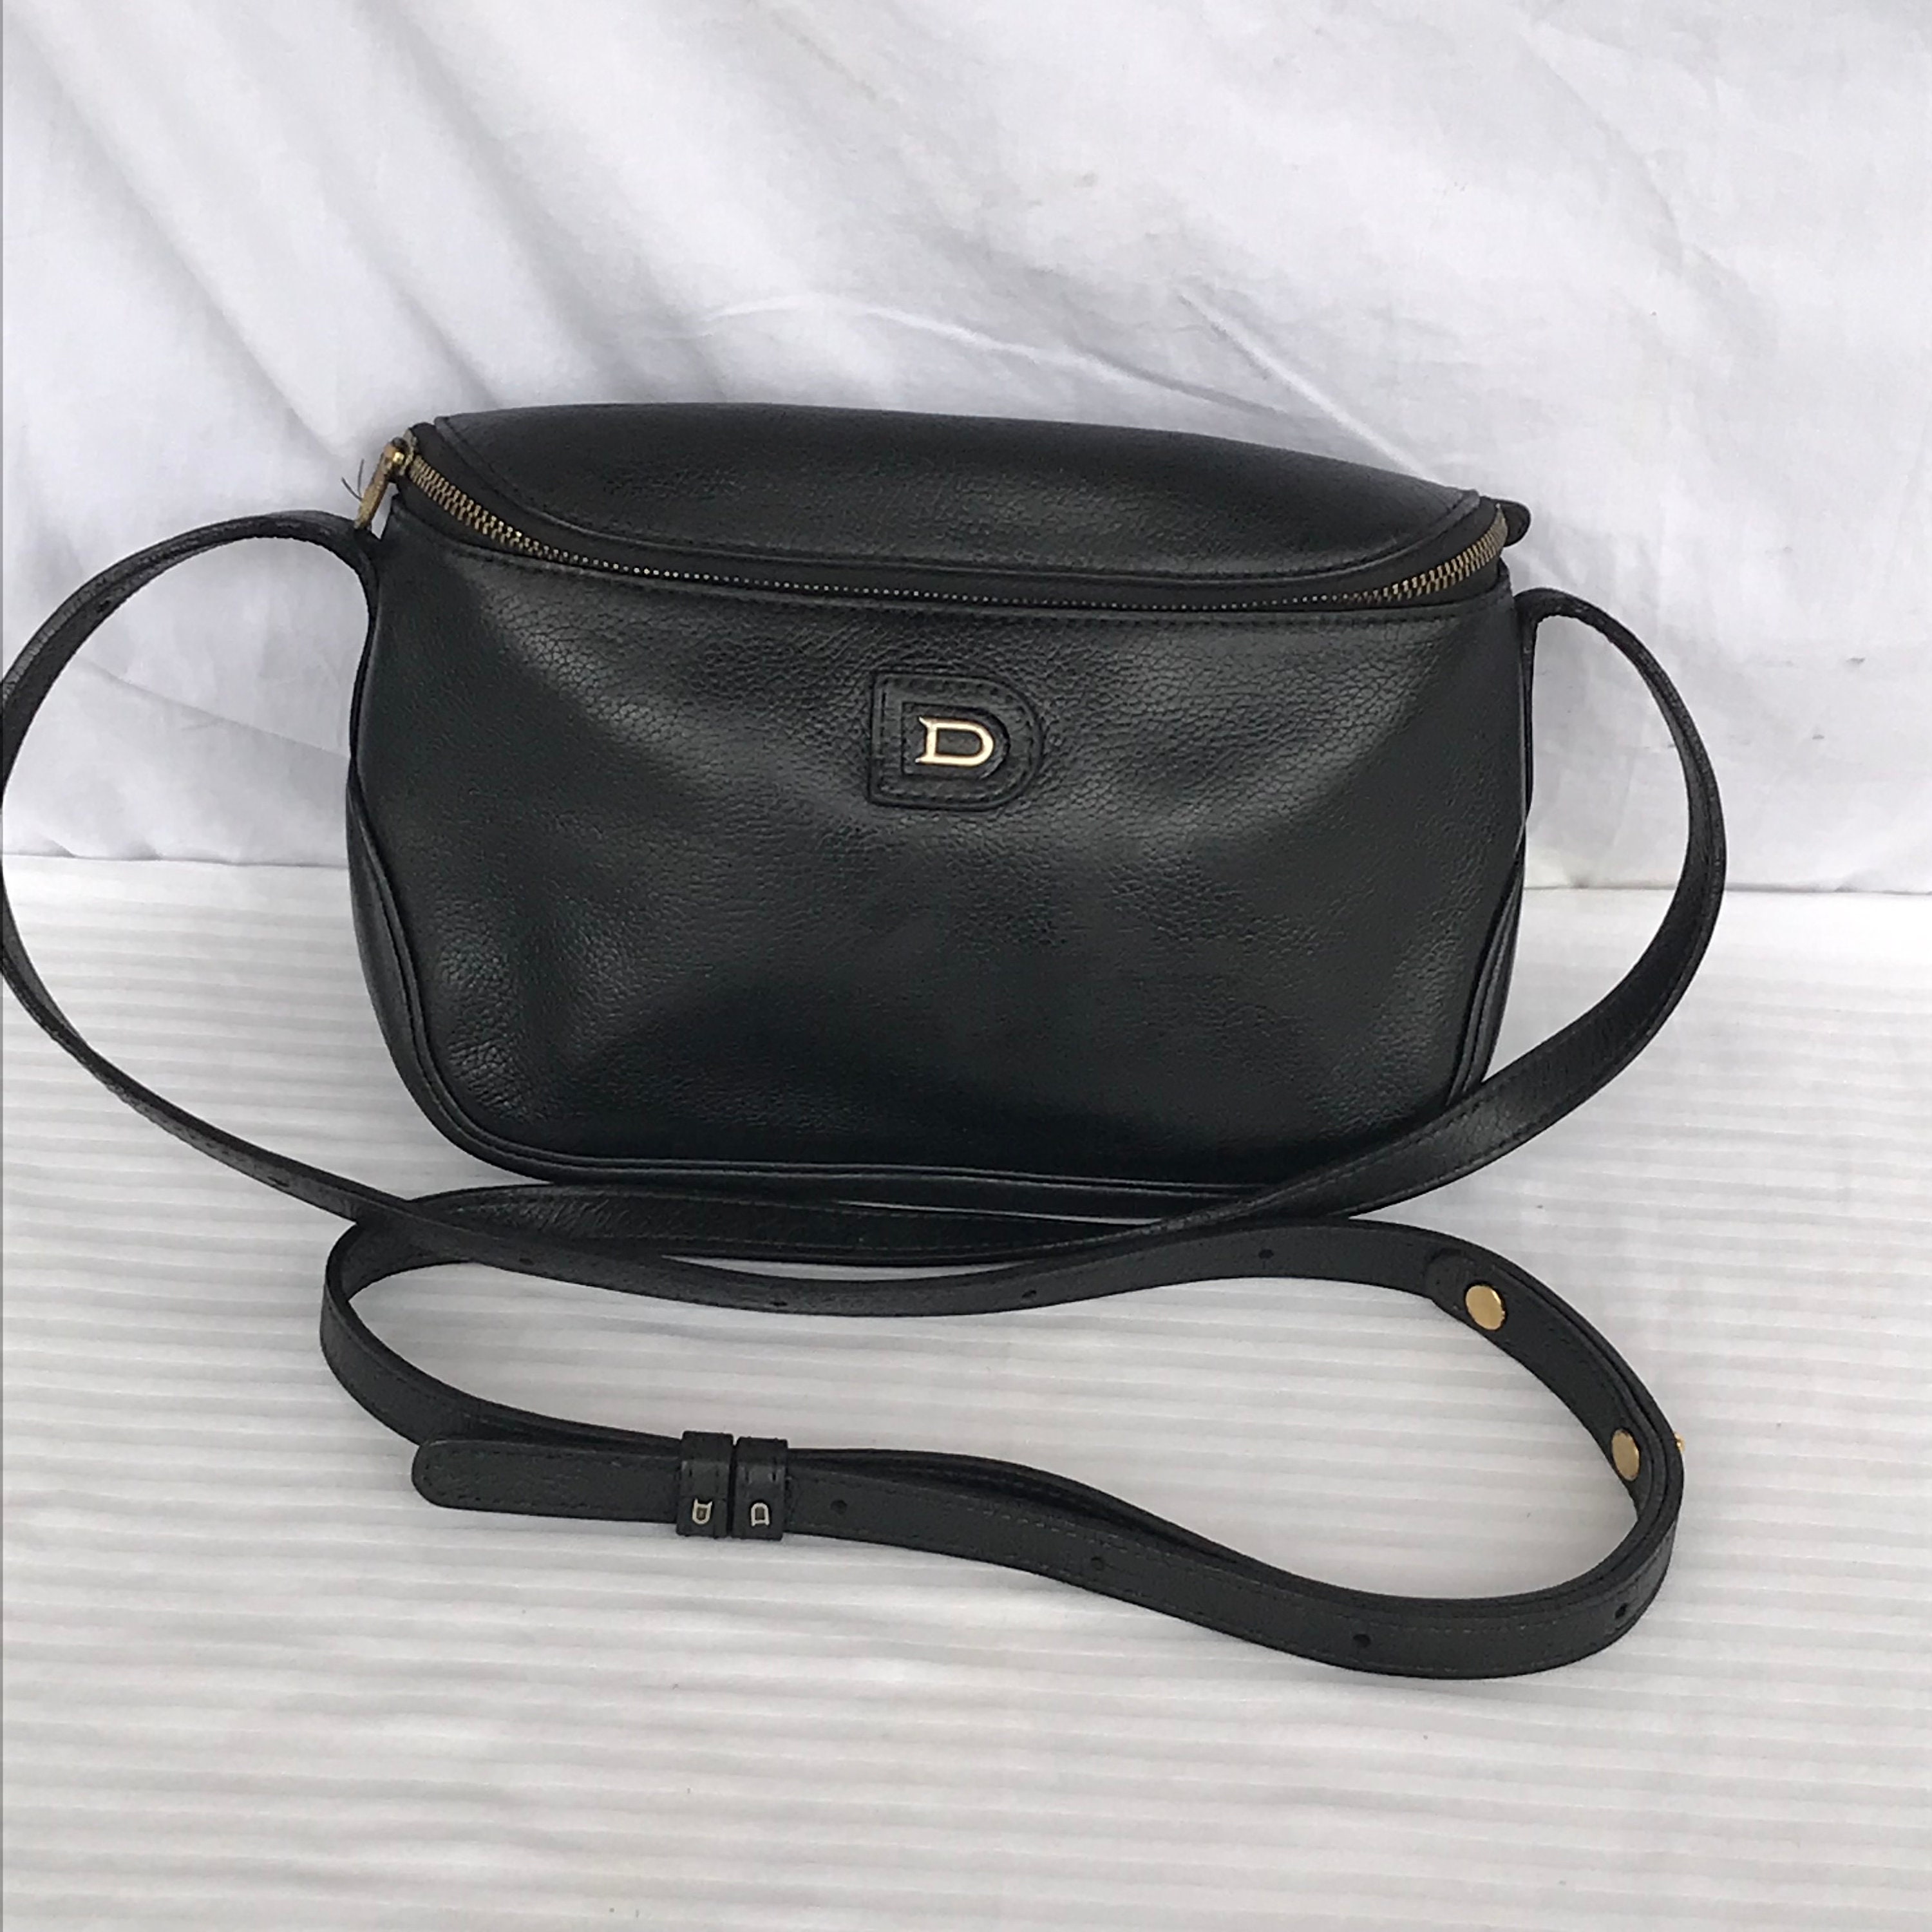 Delvaux - Authenticated Handbag - Leather Black Plain for Women, Very Good Condition